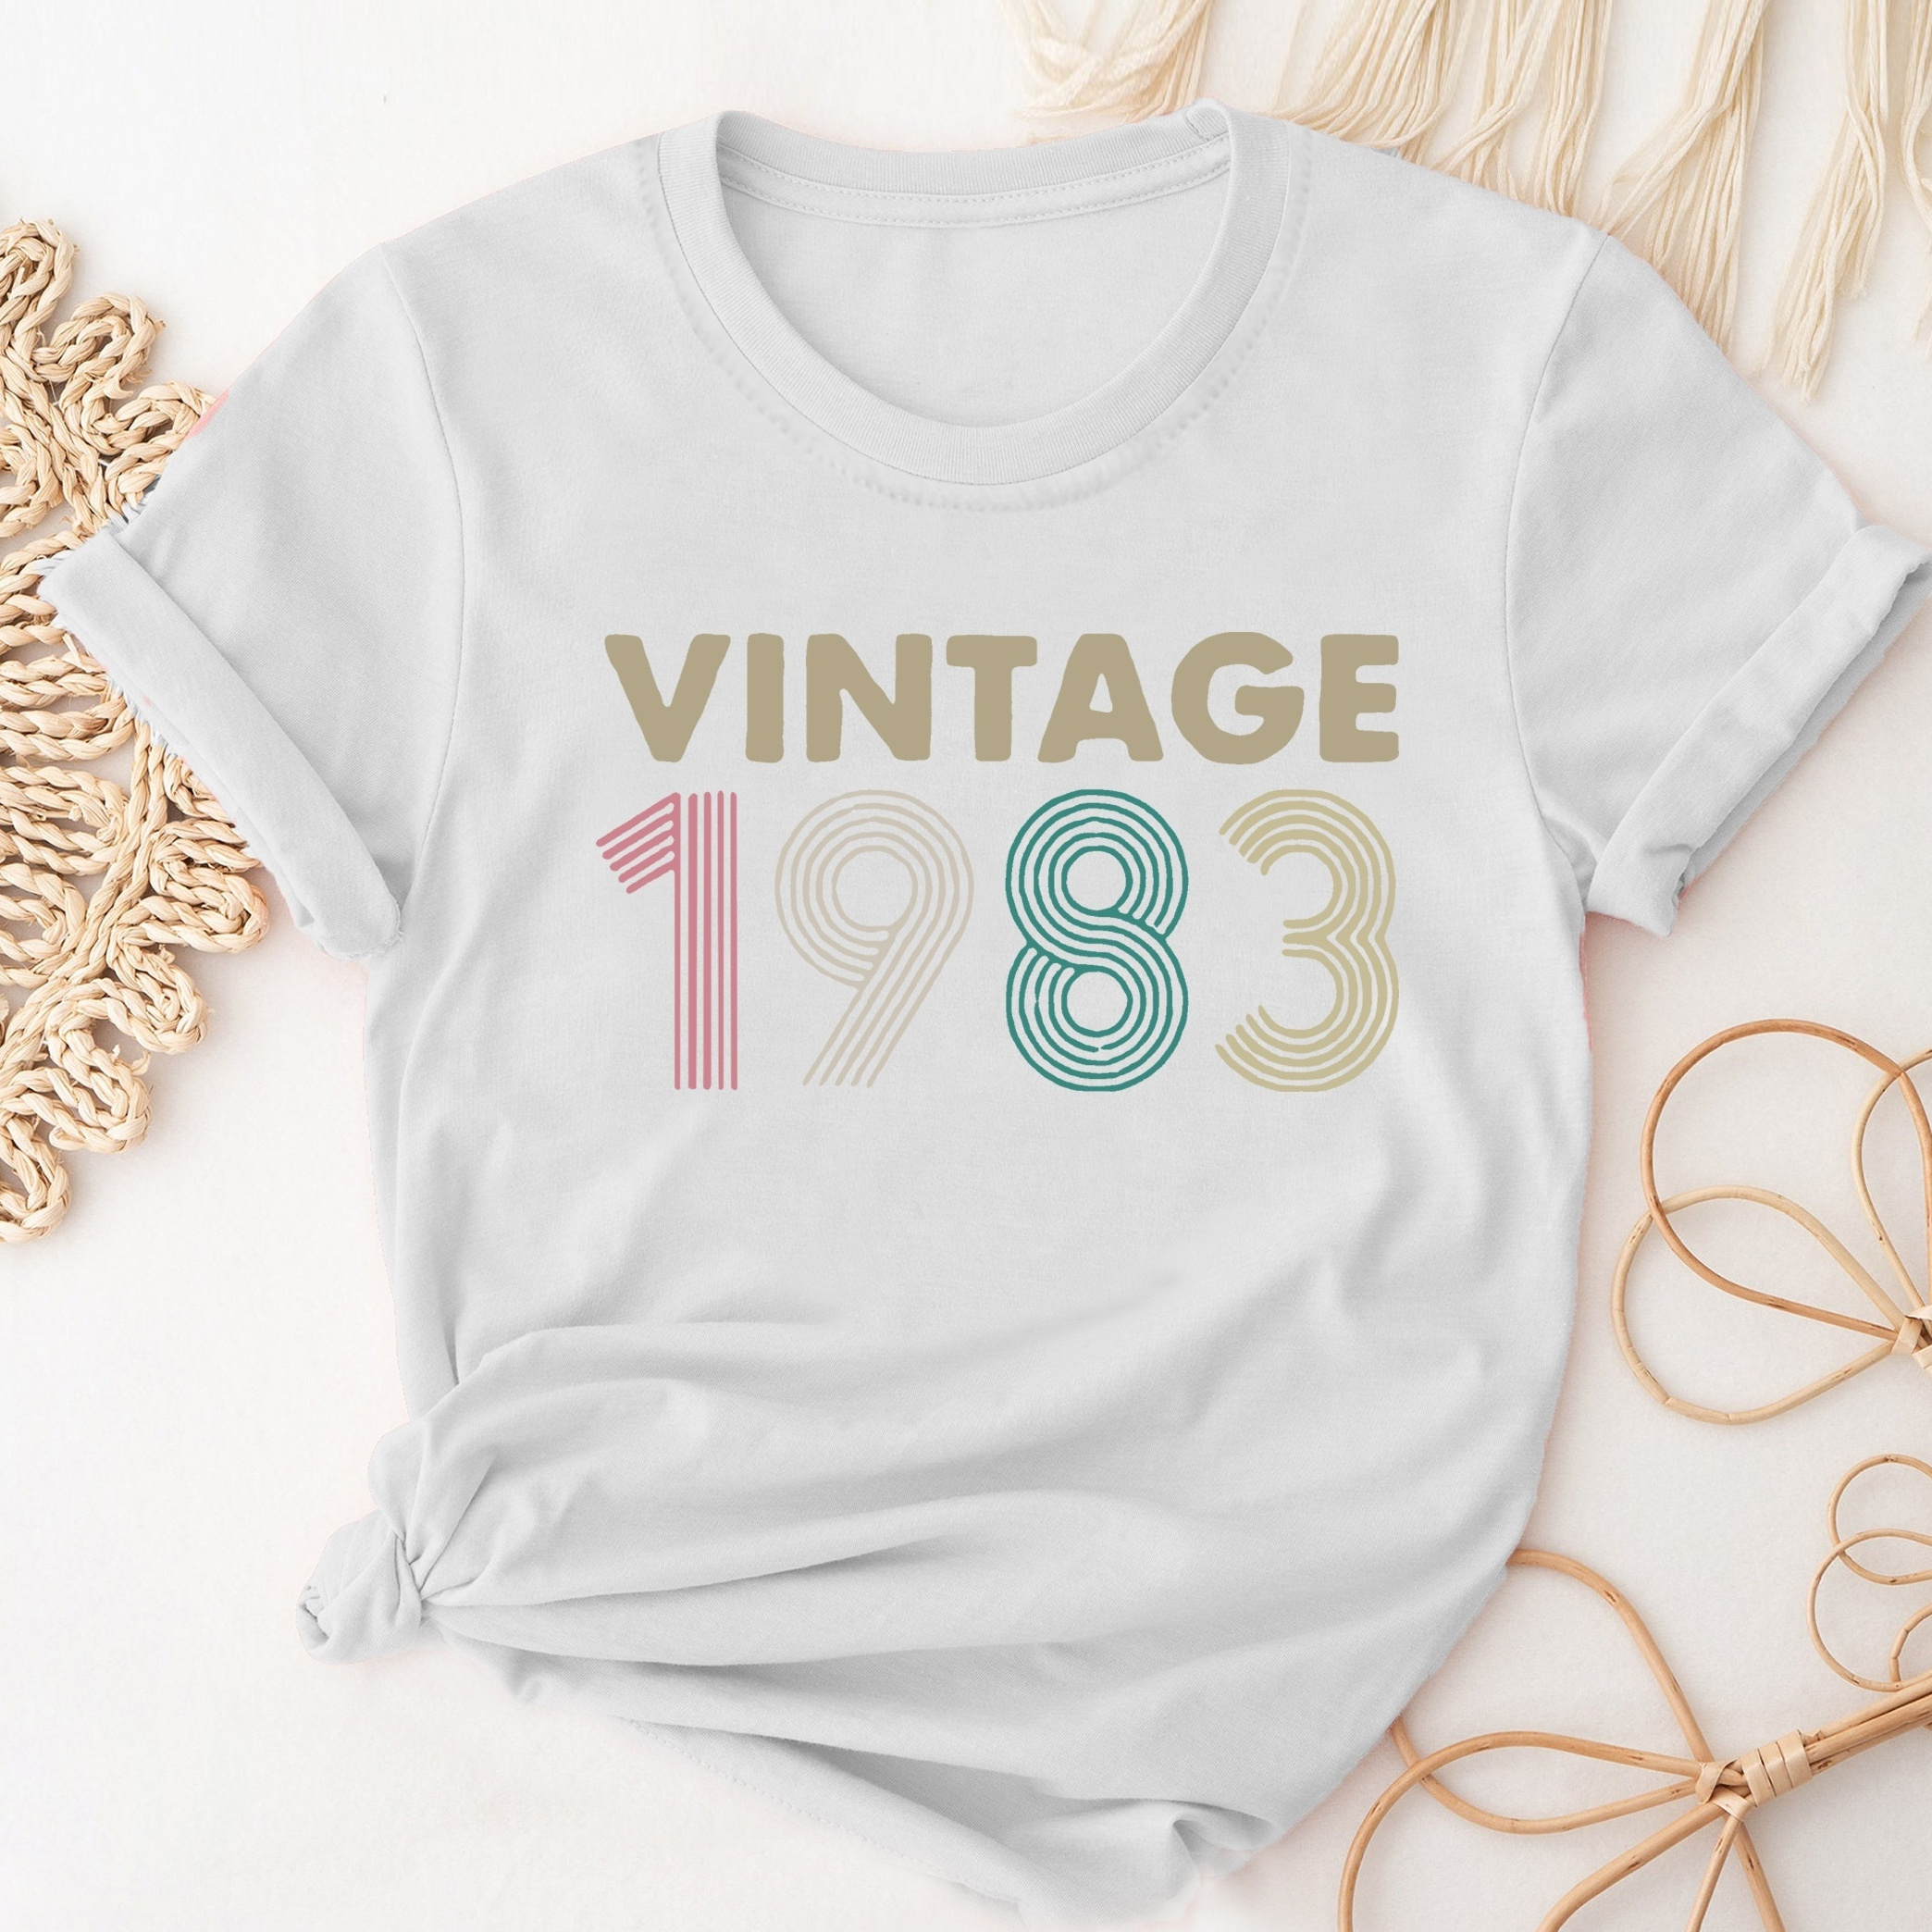 

Vintage 1983 Print T-shirt, Short Sleeve Crew Neck Casual Top For All Season, Women's Clothing